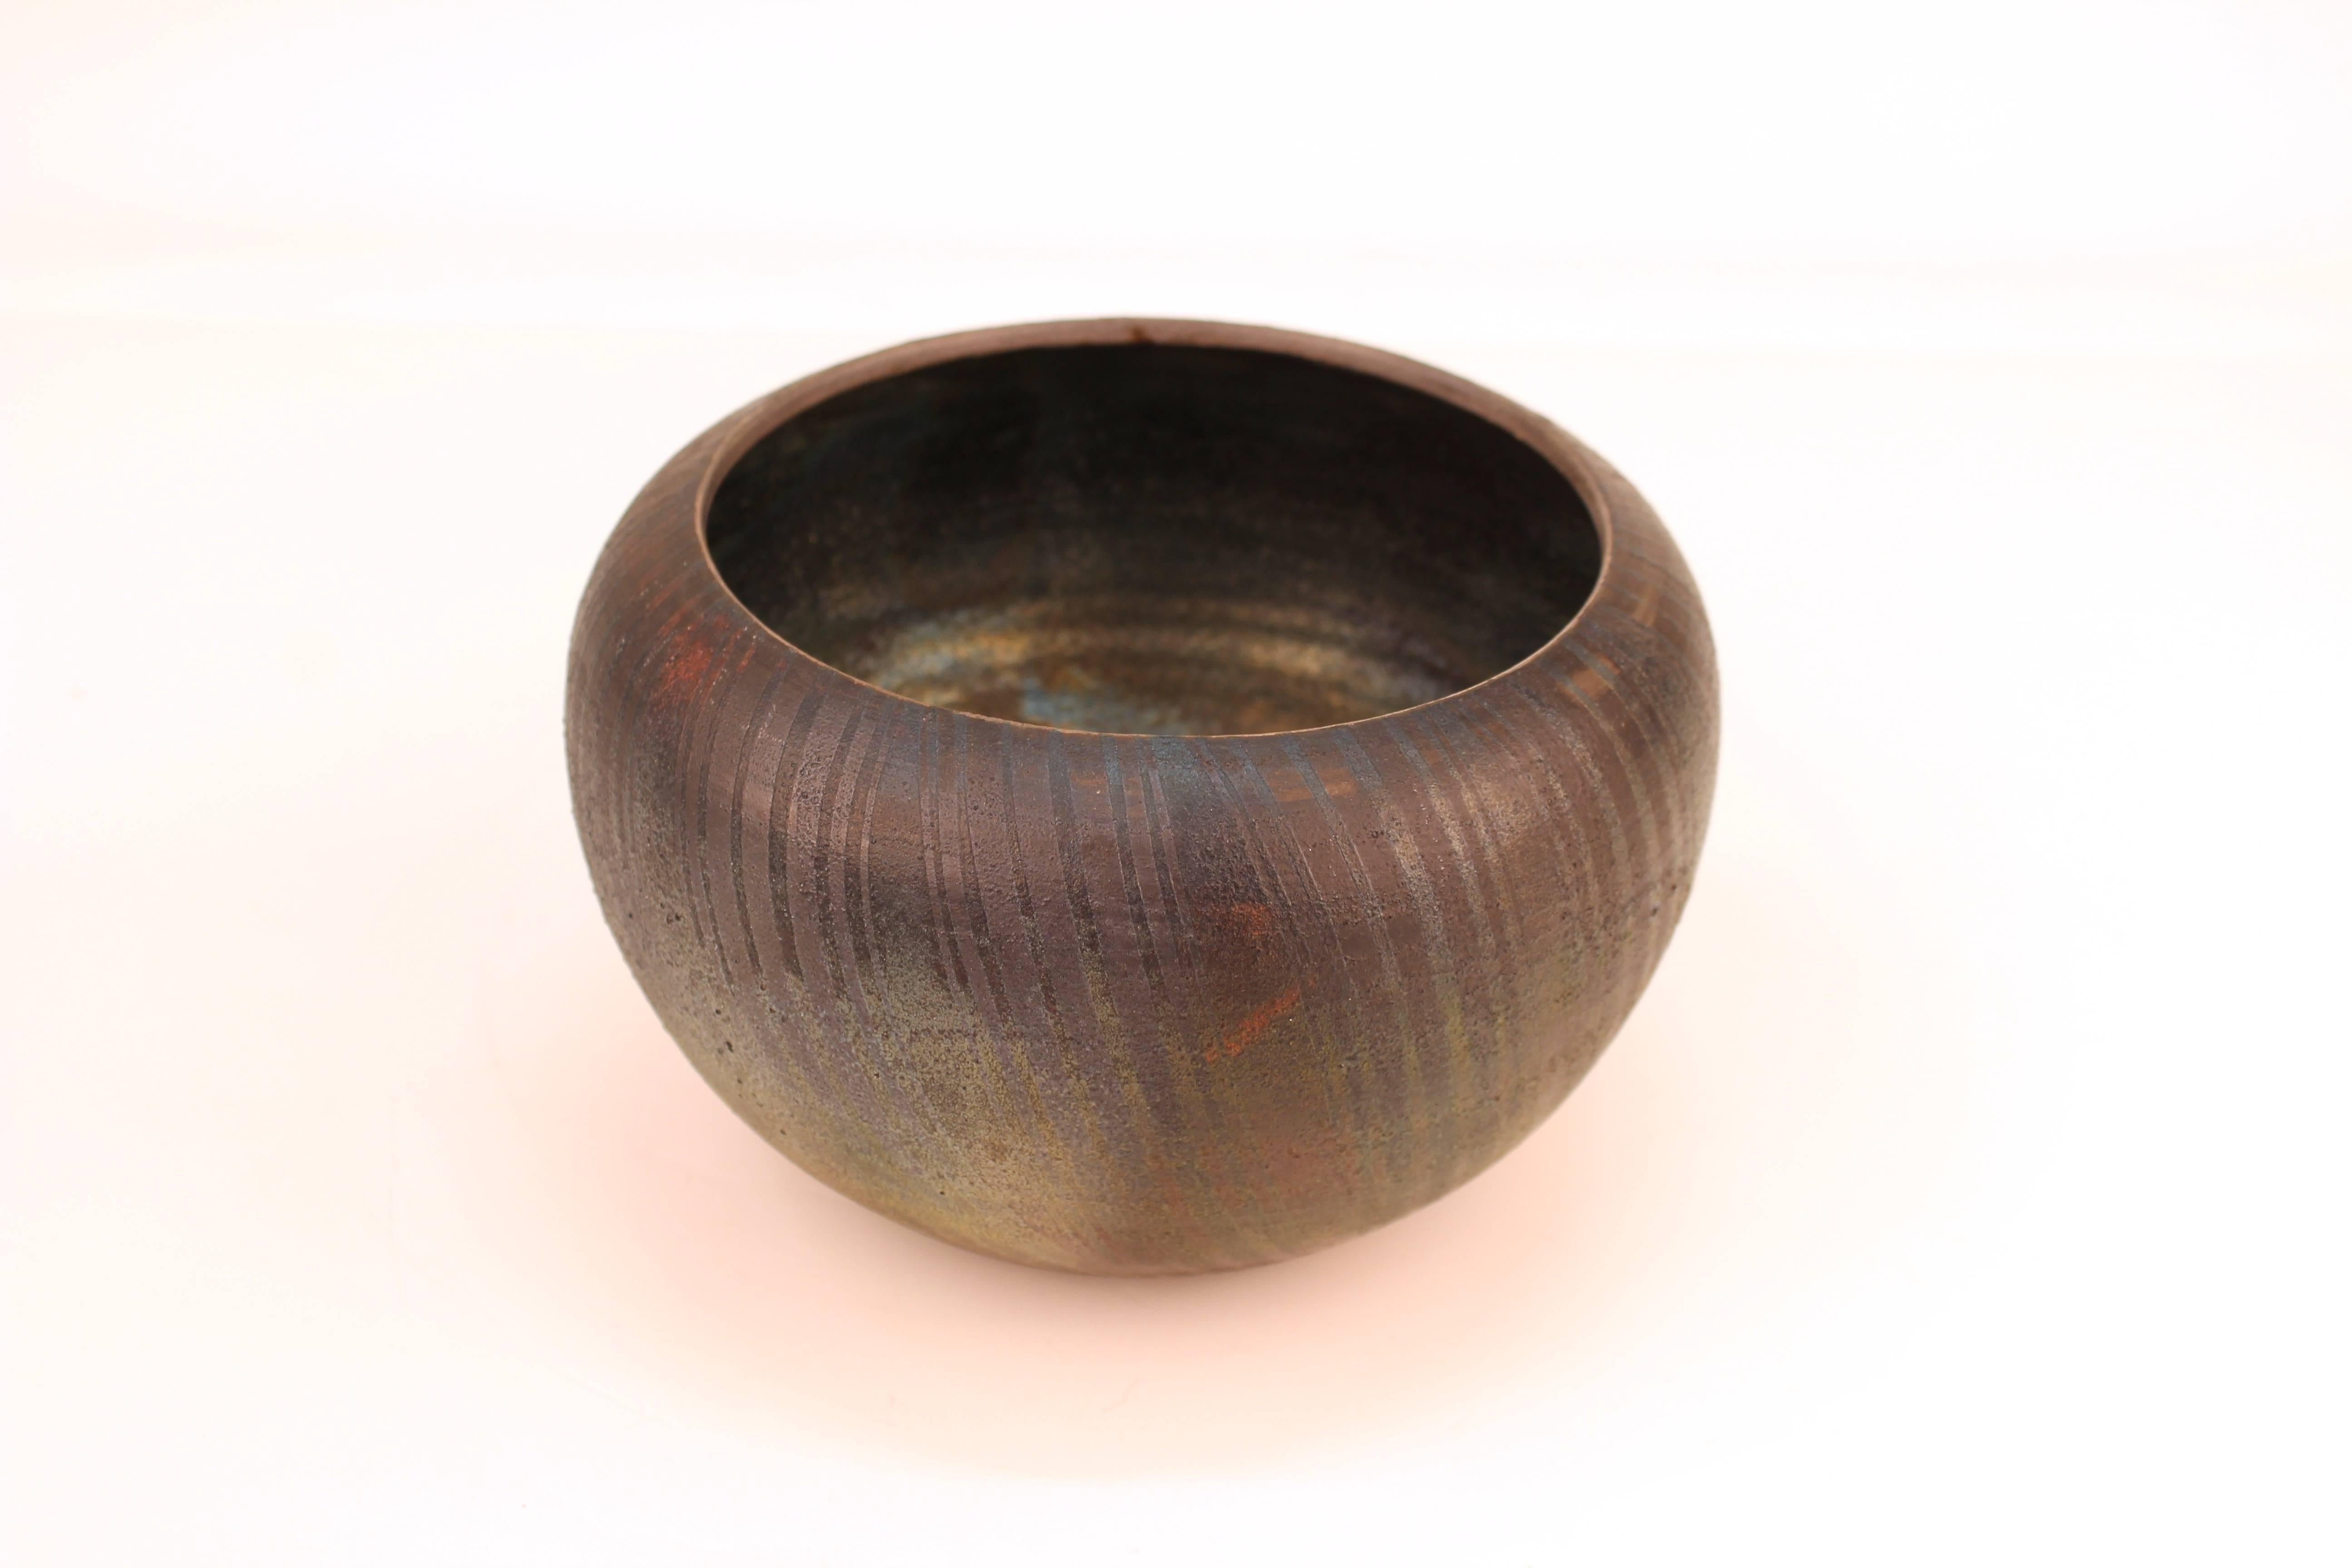 Carol Rossman raku-fired ceramic bowl, signed on the bottom by the artist. The piece is in great vintage condition.